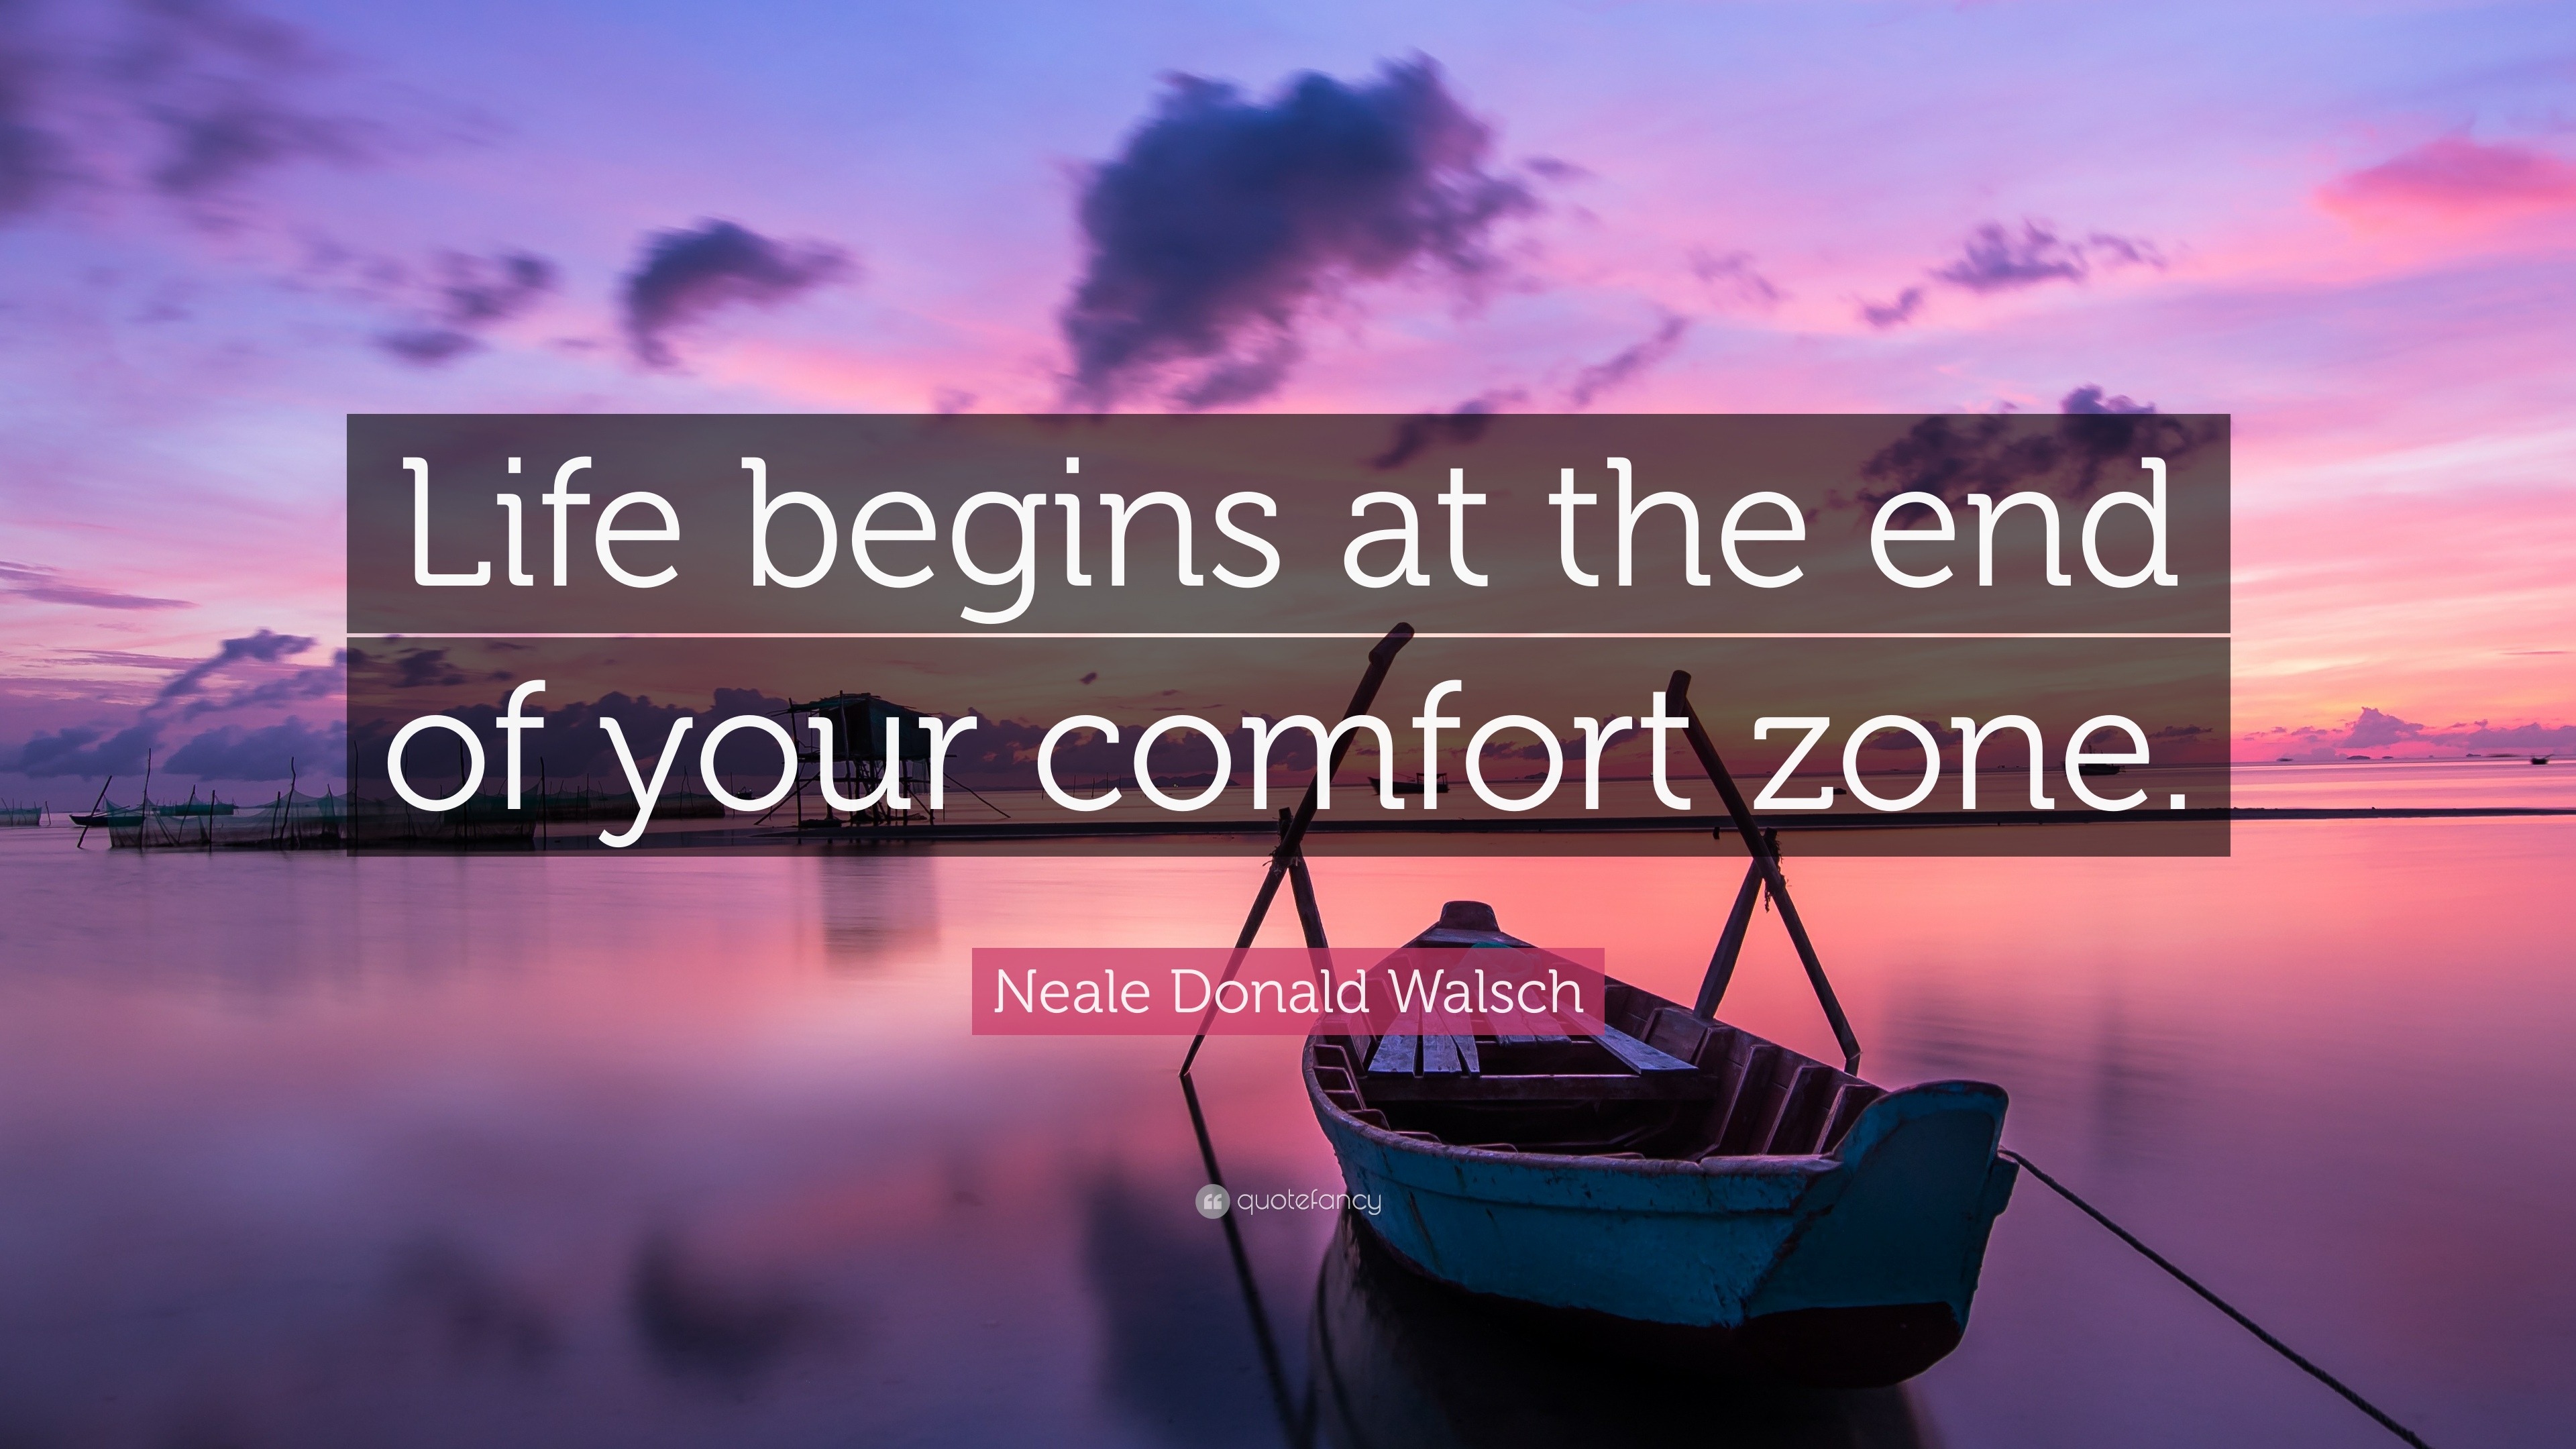 Neale Donald Walsch Quote: “Life Begins At The End Of Your Comfort Zone.”